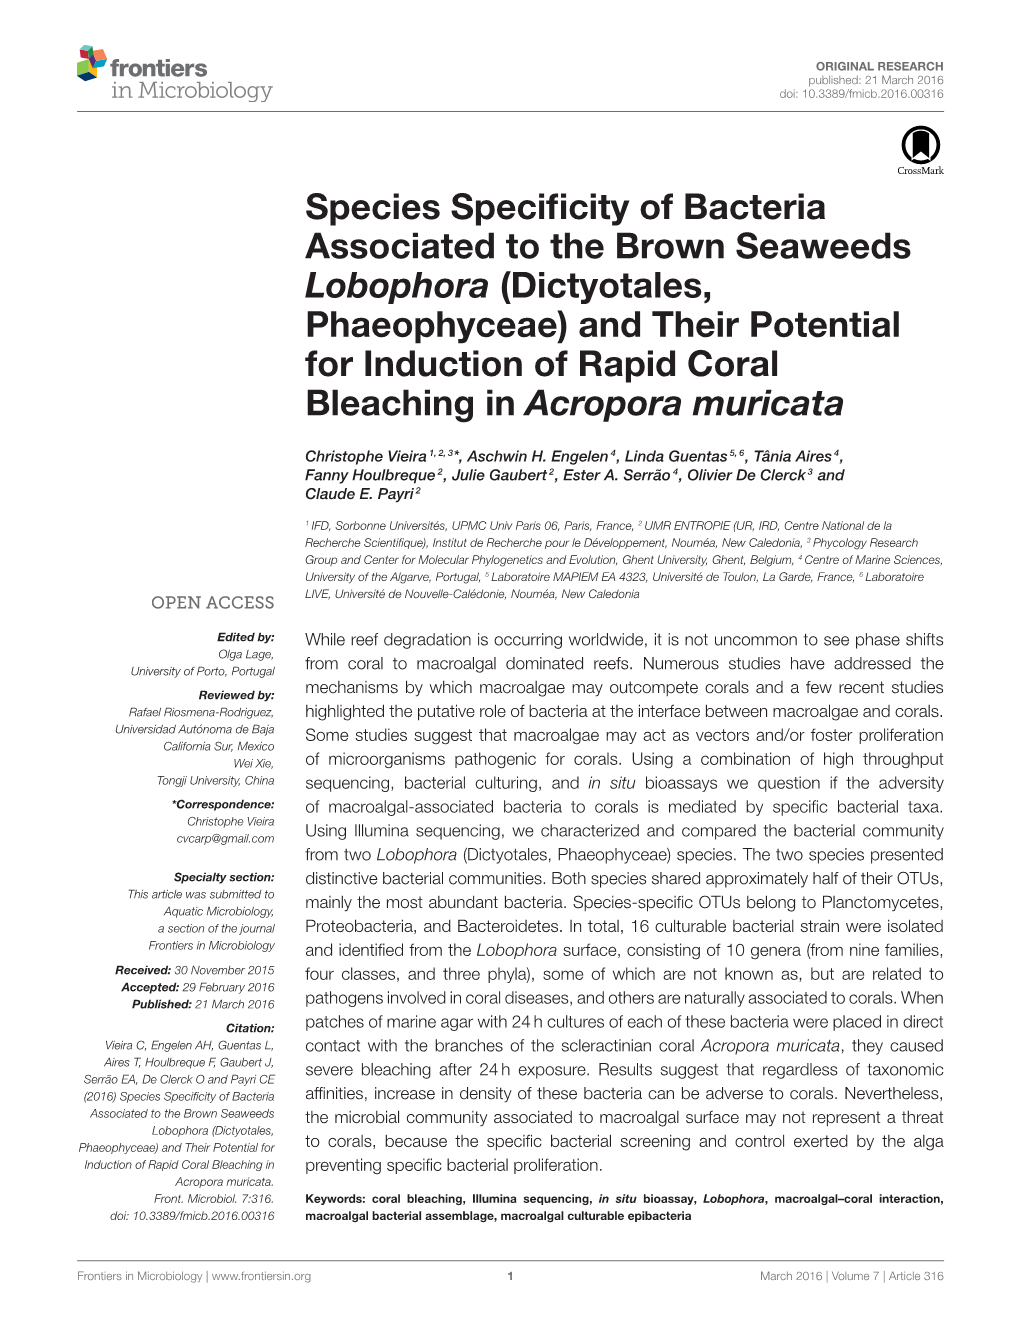 Species Specificity of Bacteria Associated to the Brown Seaweeds